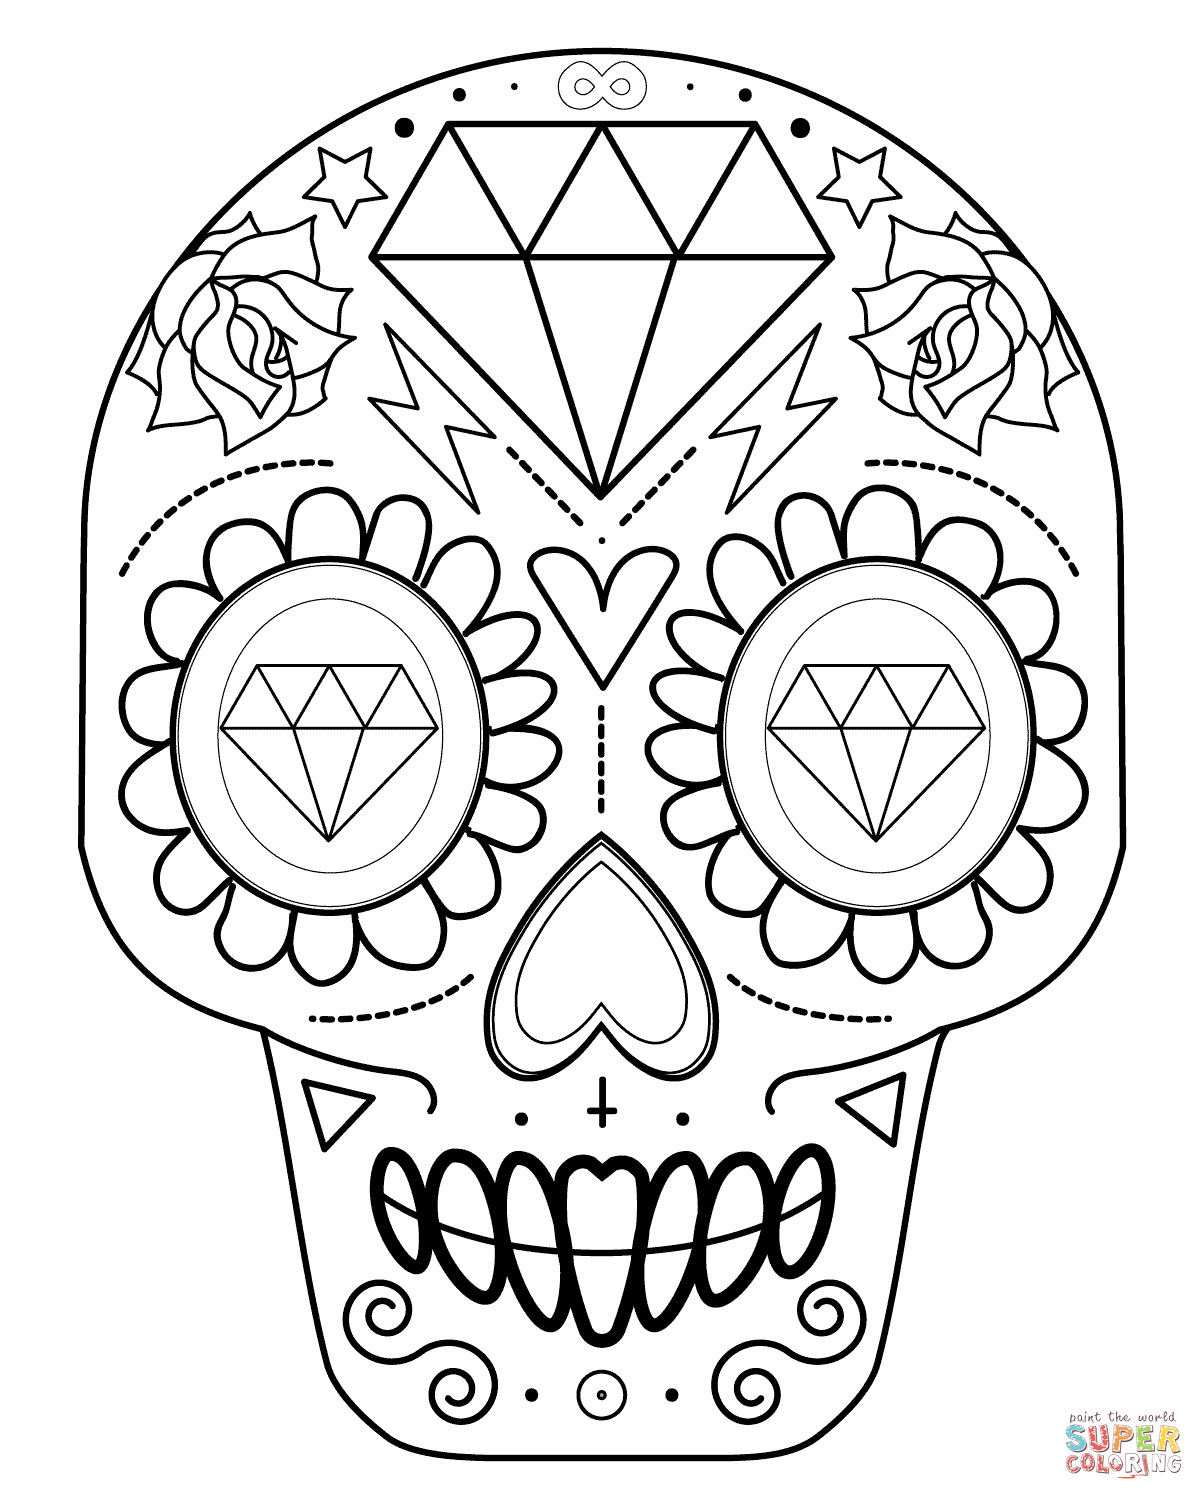 Free Printable Sugar Skull Coloring Pages
 Easy Sugar Skull Coloring Pages Coloring Home